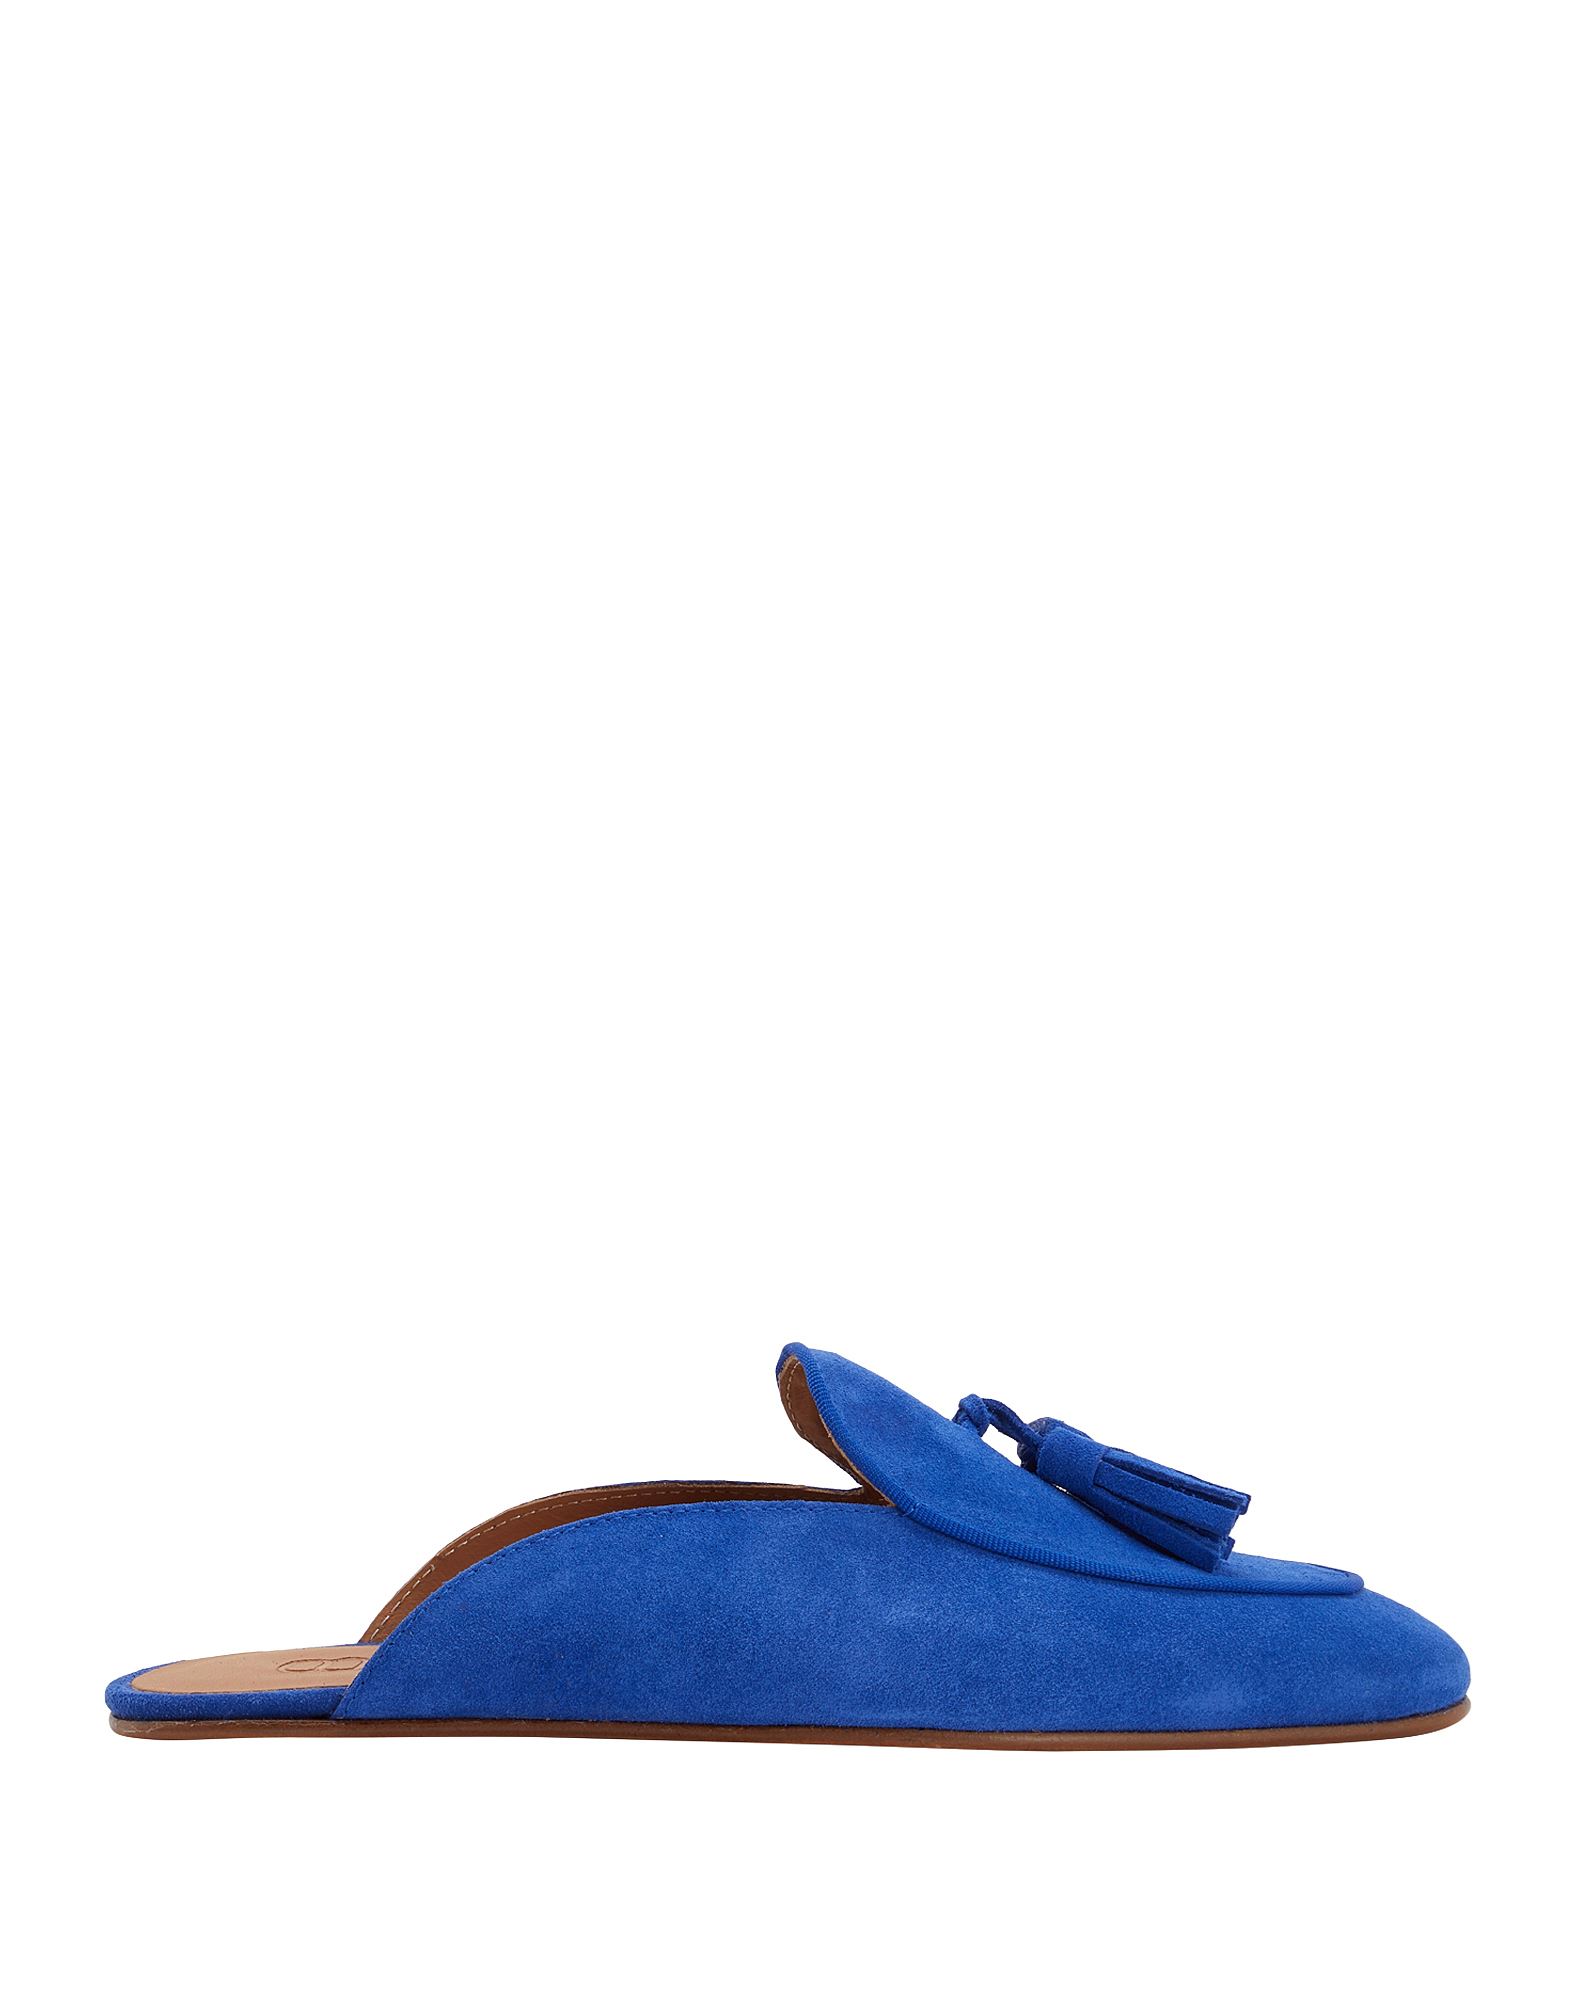 8 By Yoox Suede Leather Tassel Mules Man Mules & Clogs Bright Blue Size 9 Calfskin